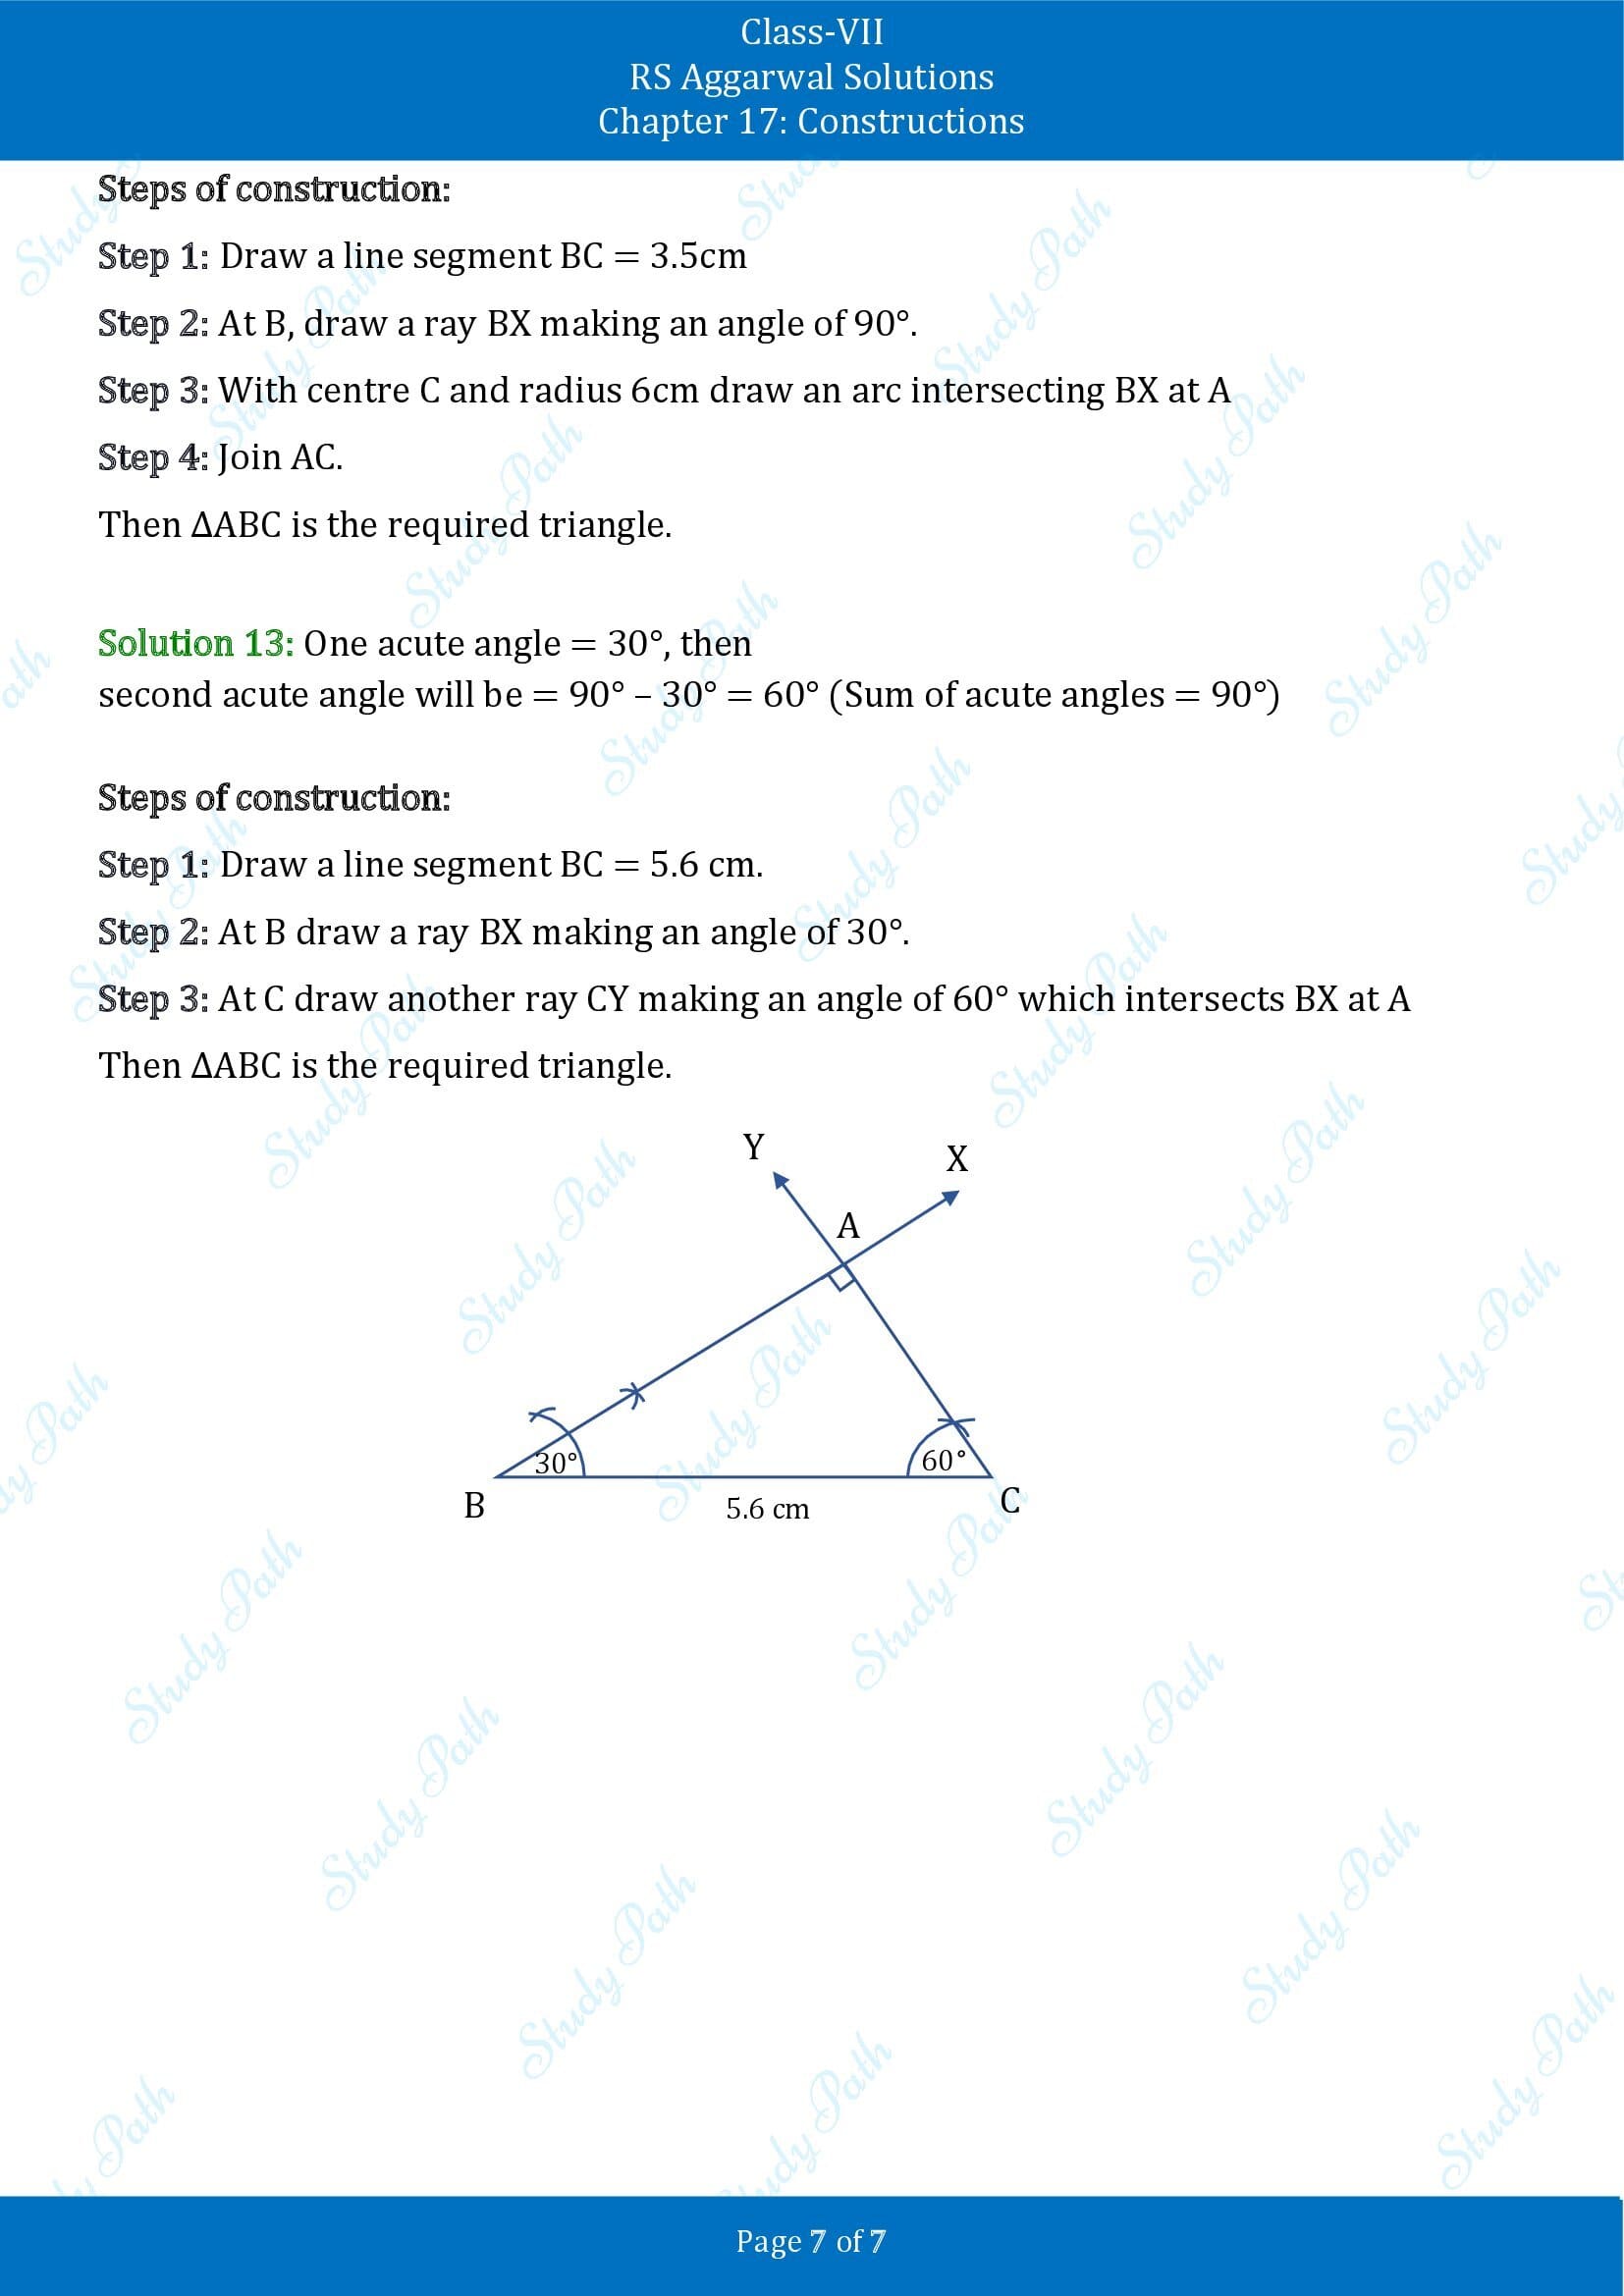 RS Aggarwal Solutions Class 7 Chapter 17 Constructions Exercise 17B 00007